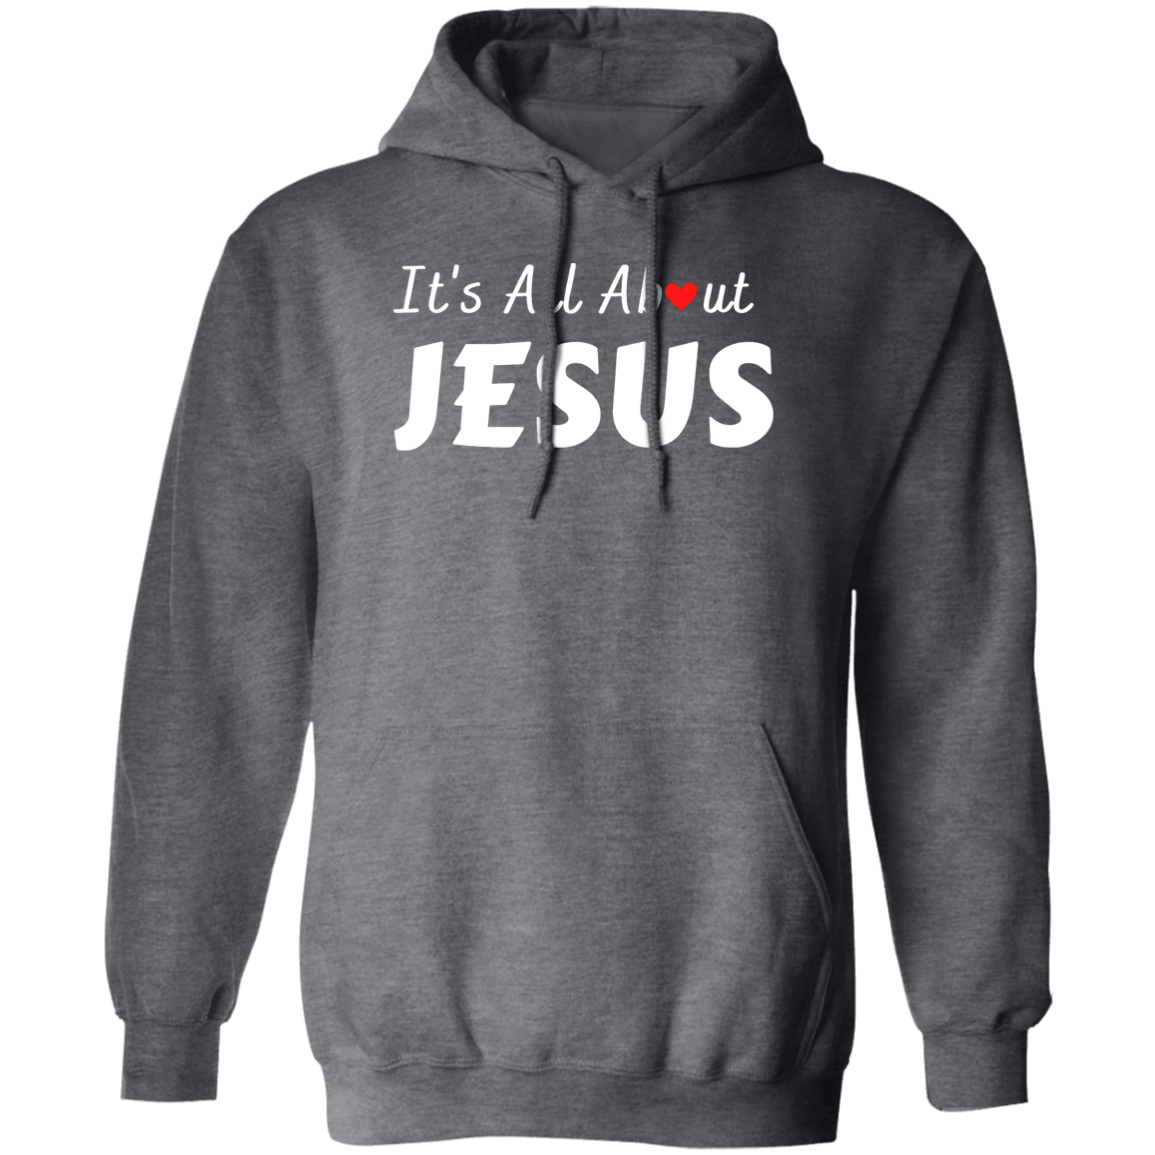 It's All about Jesus Pullover Hoodie Faith Based Apparel